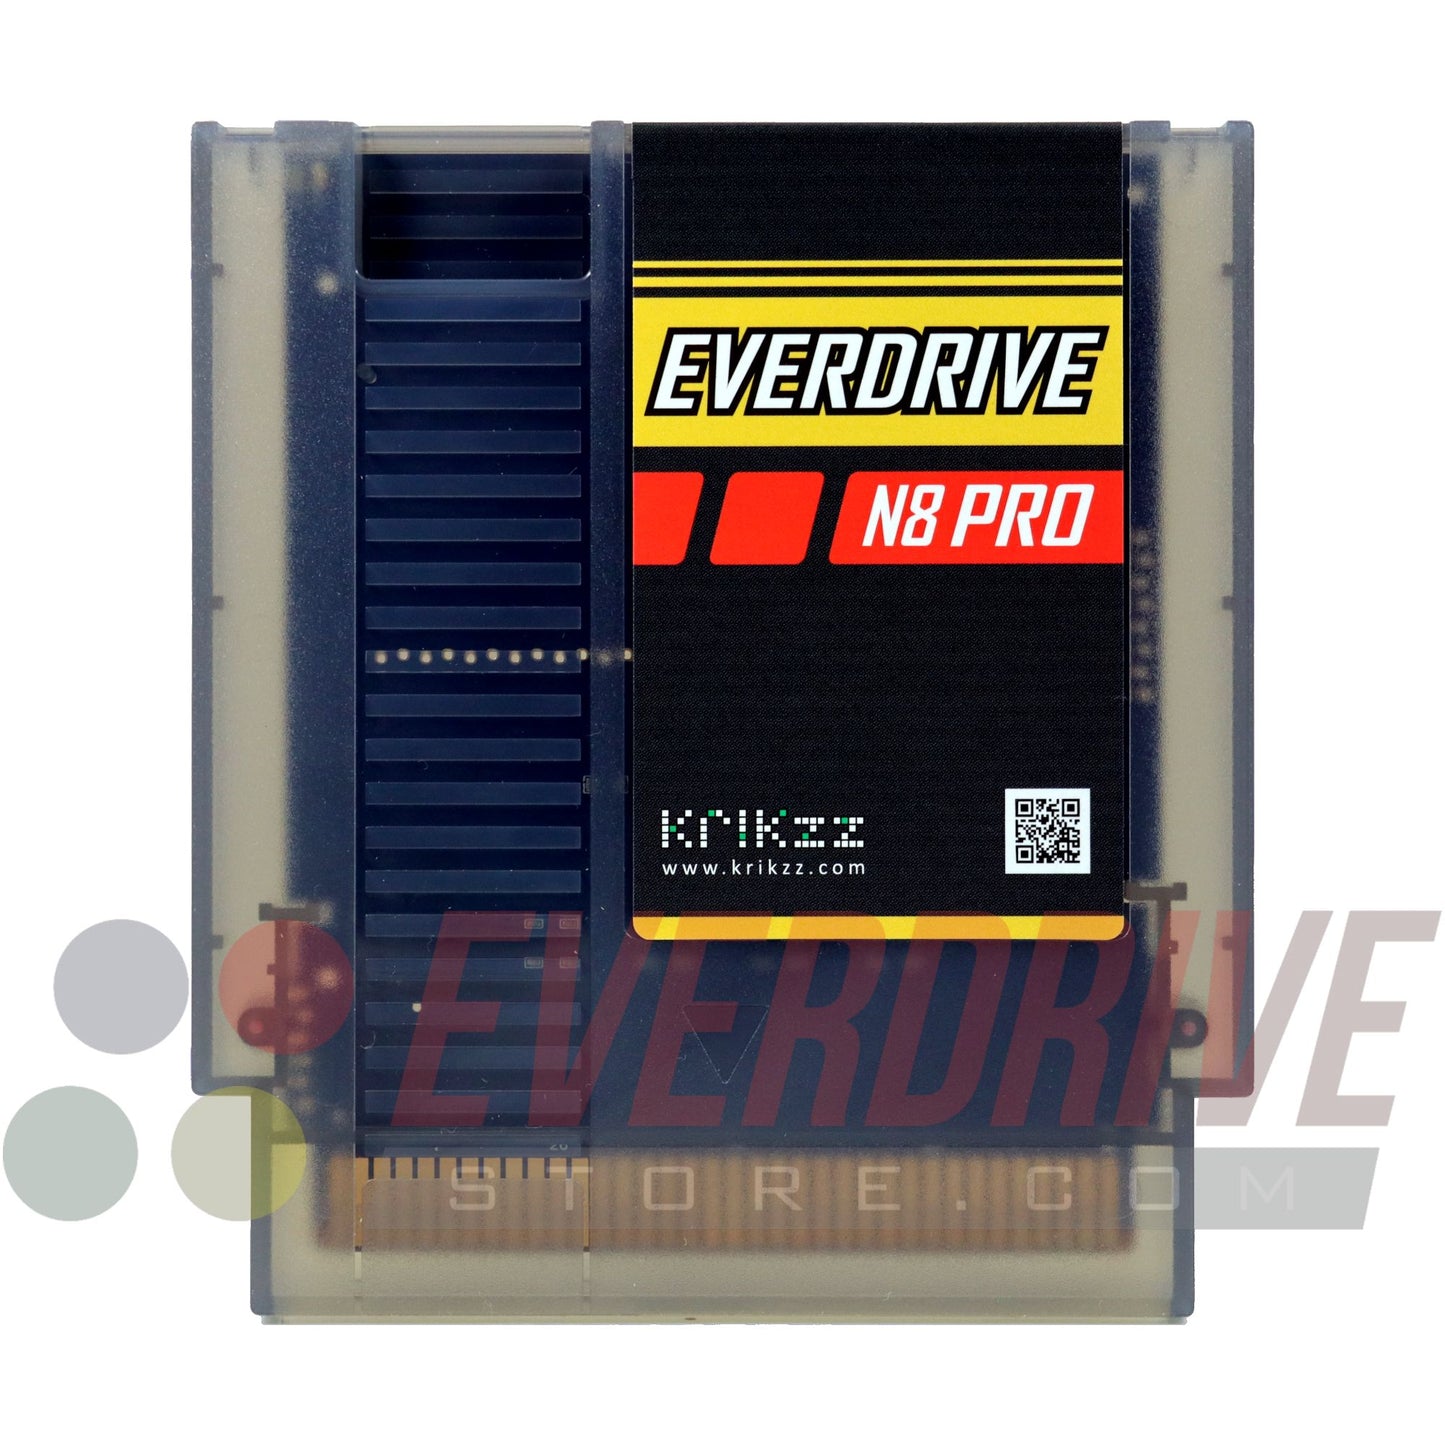 Everdrive N8 PRO - Frosted Black